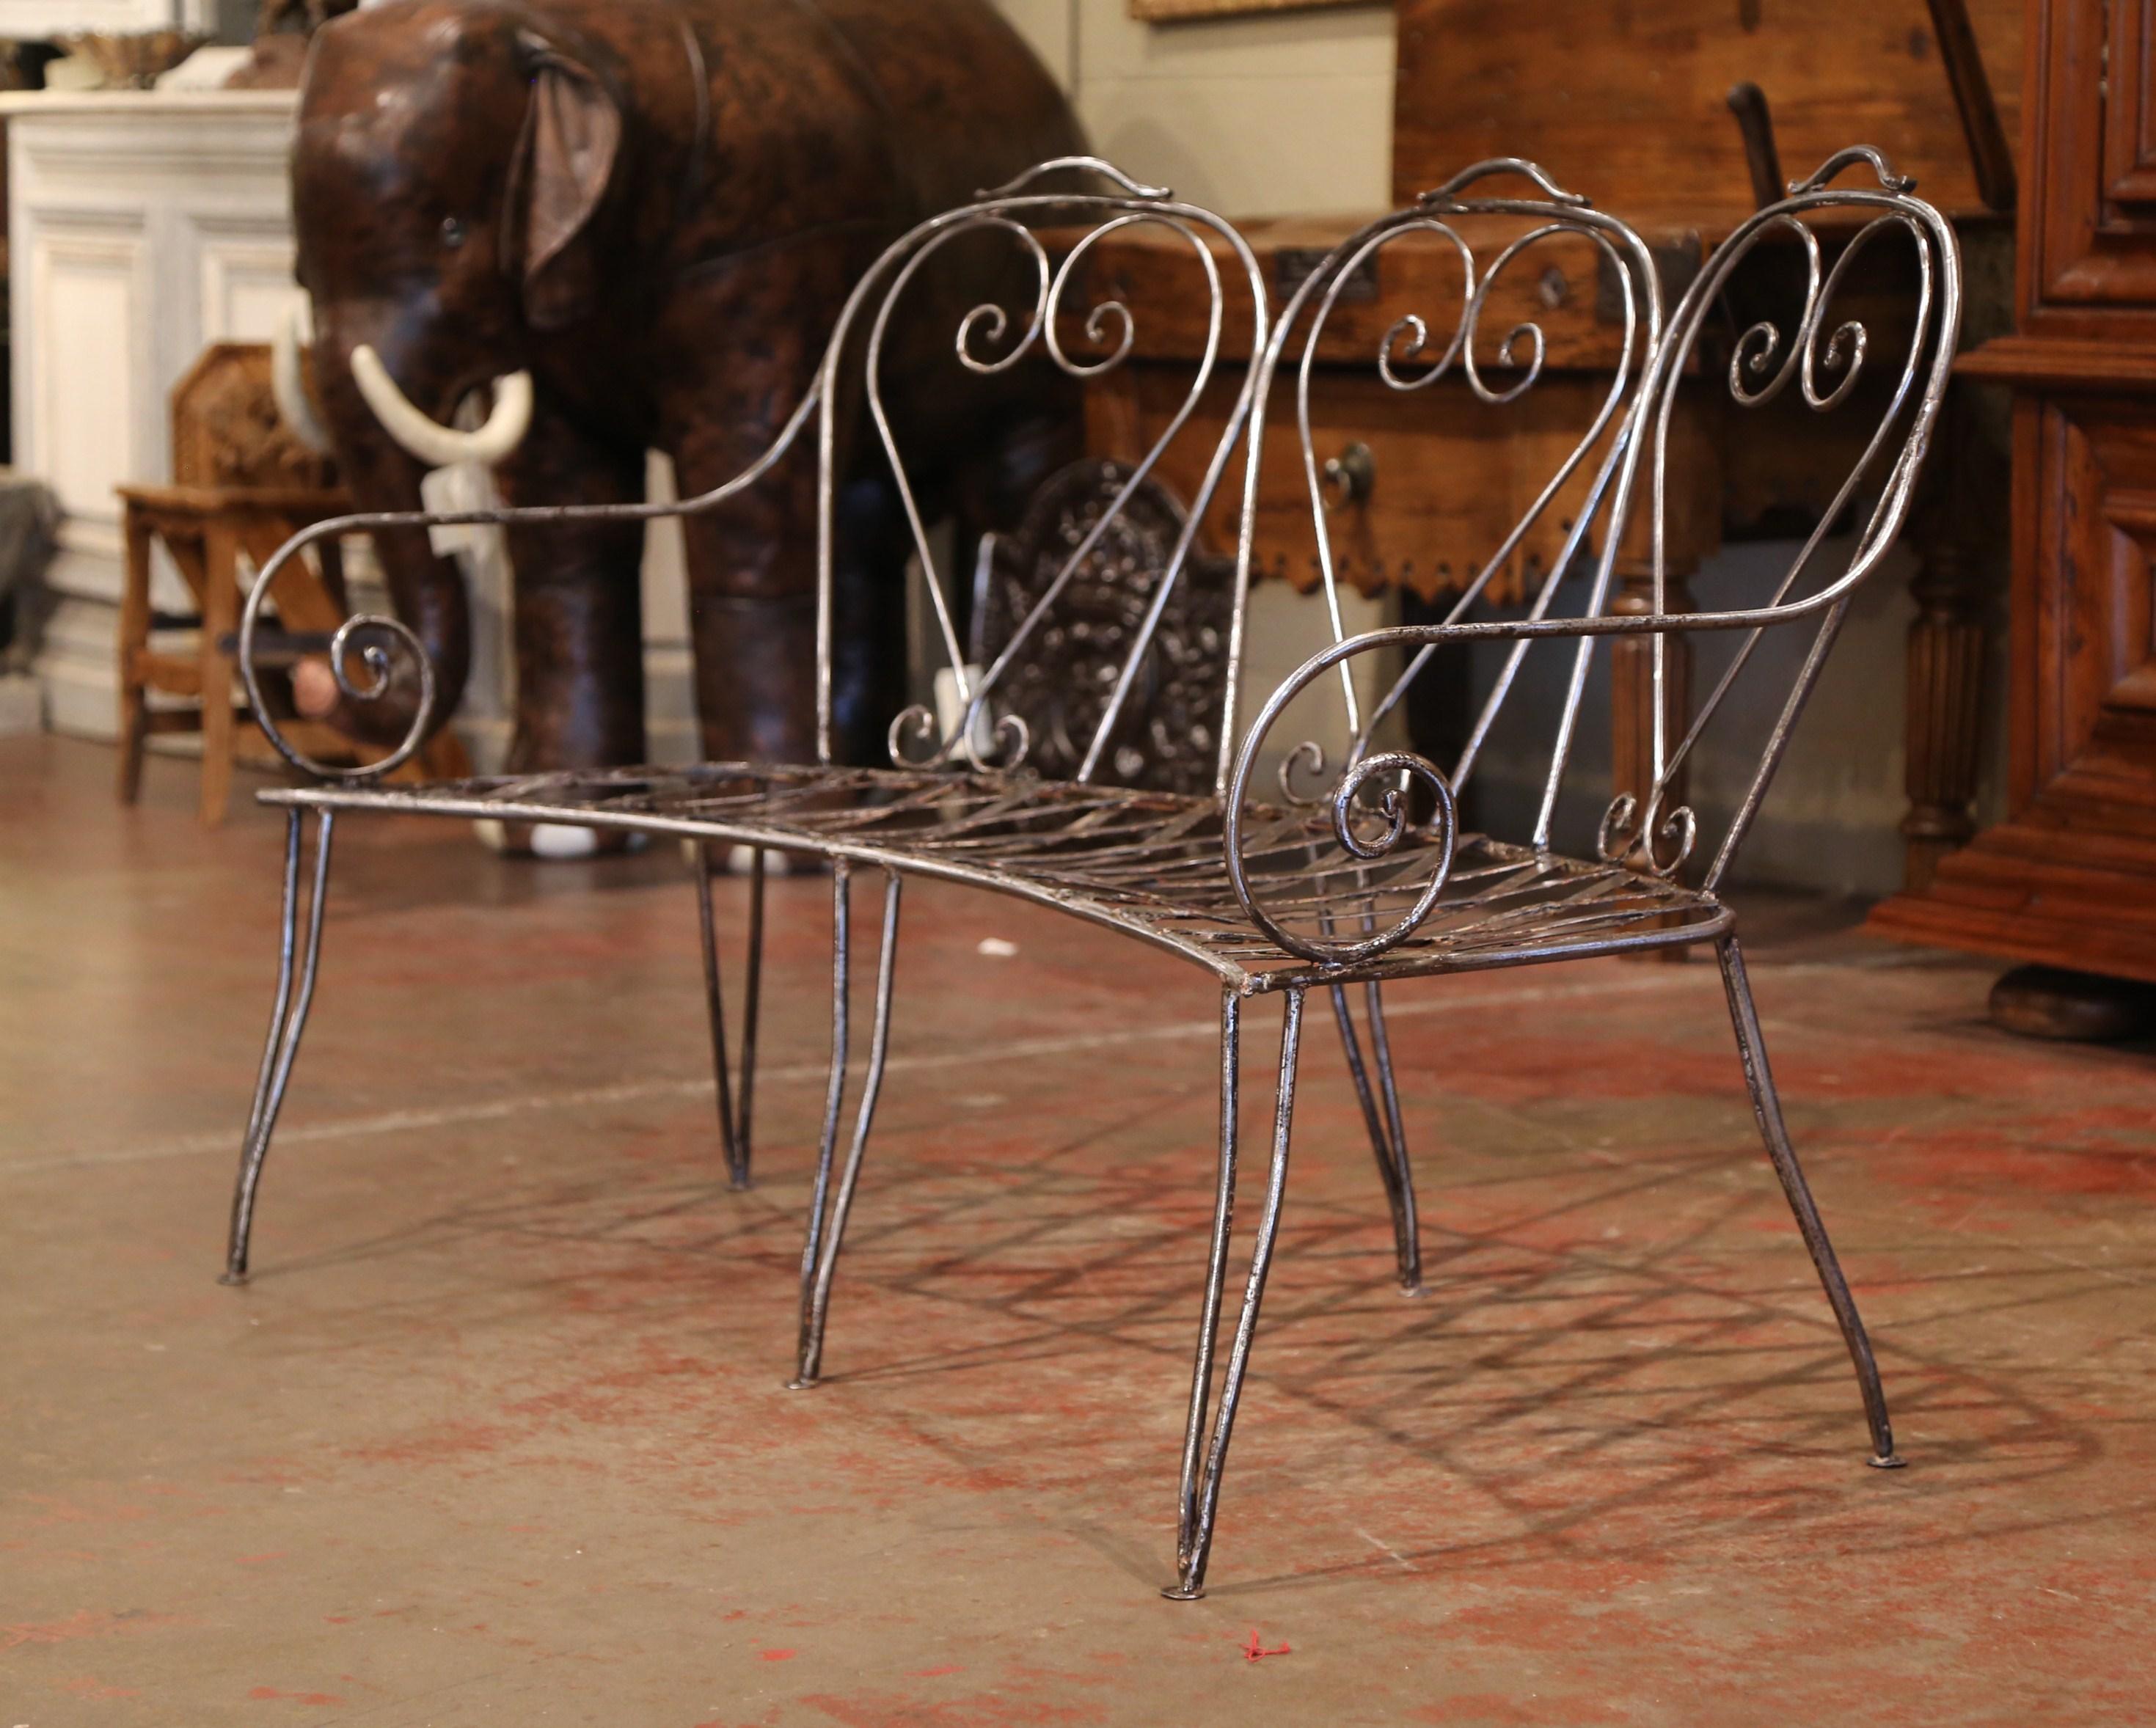 Louis Philippe 19th Century French Curved Polished Iron Three-Seat Garden Bench from Normandy